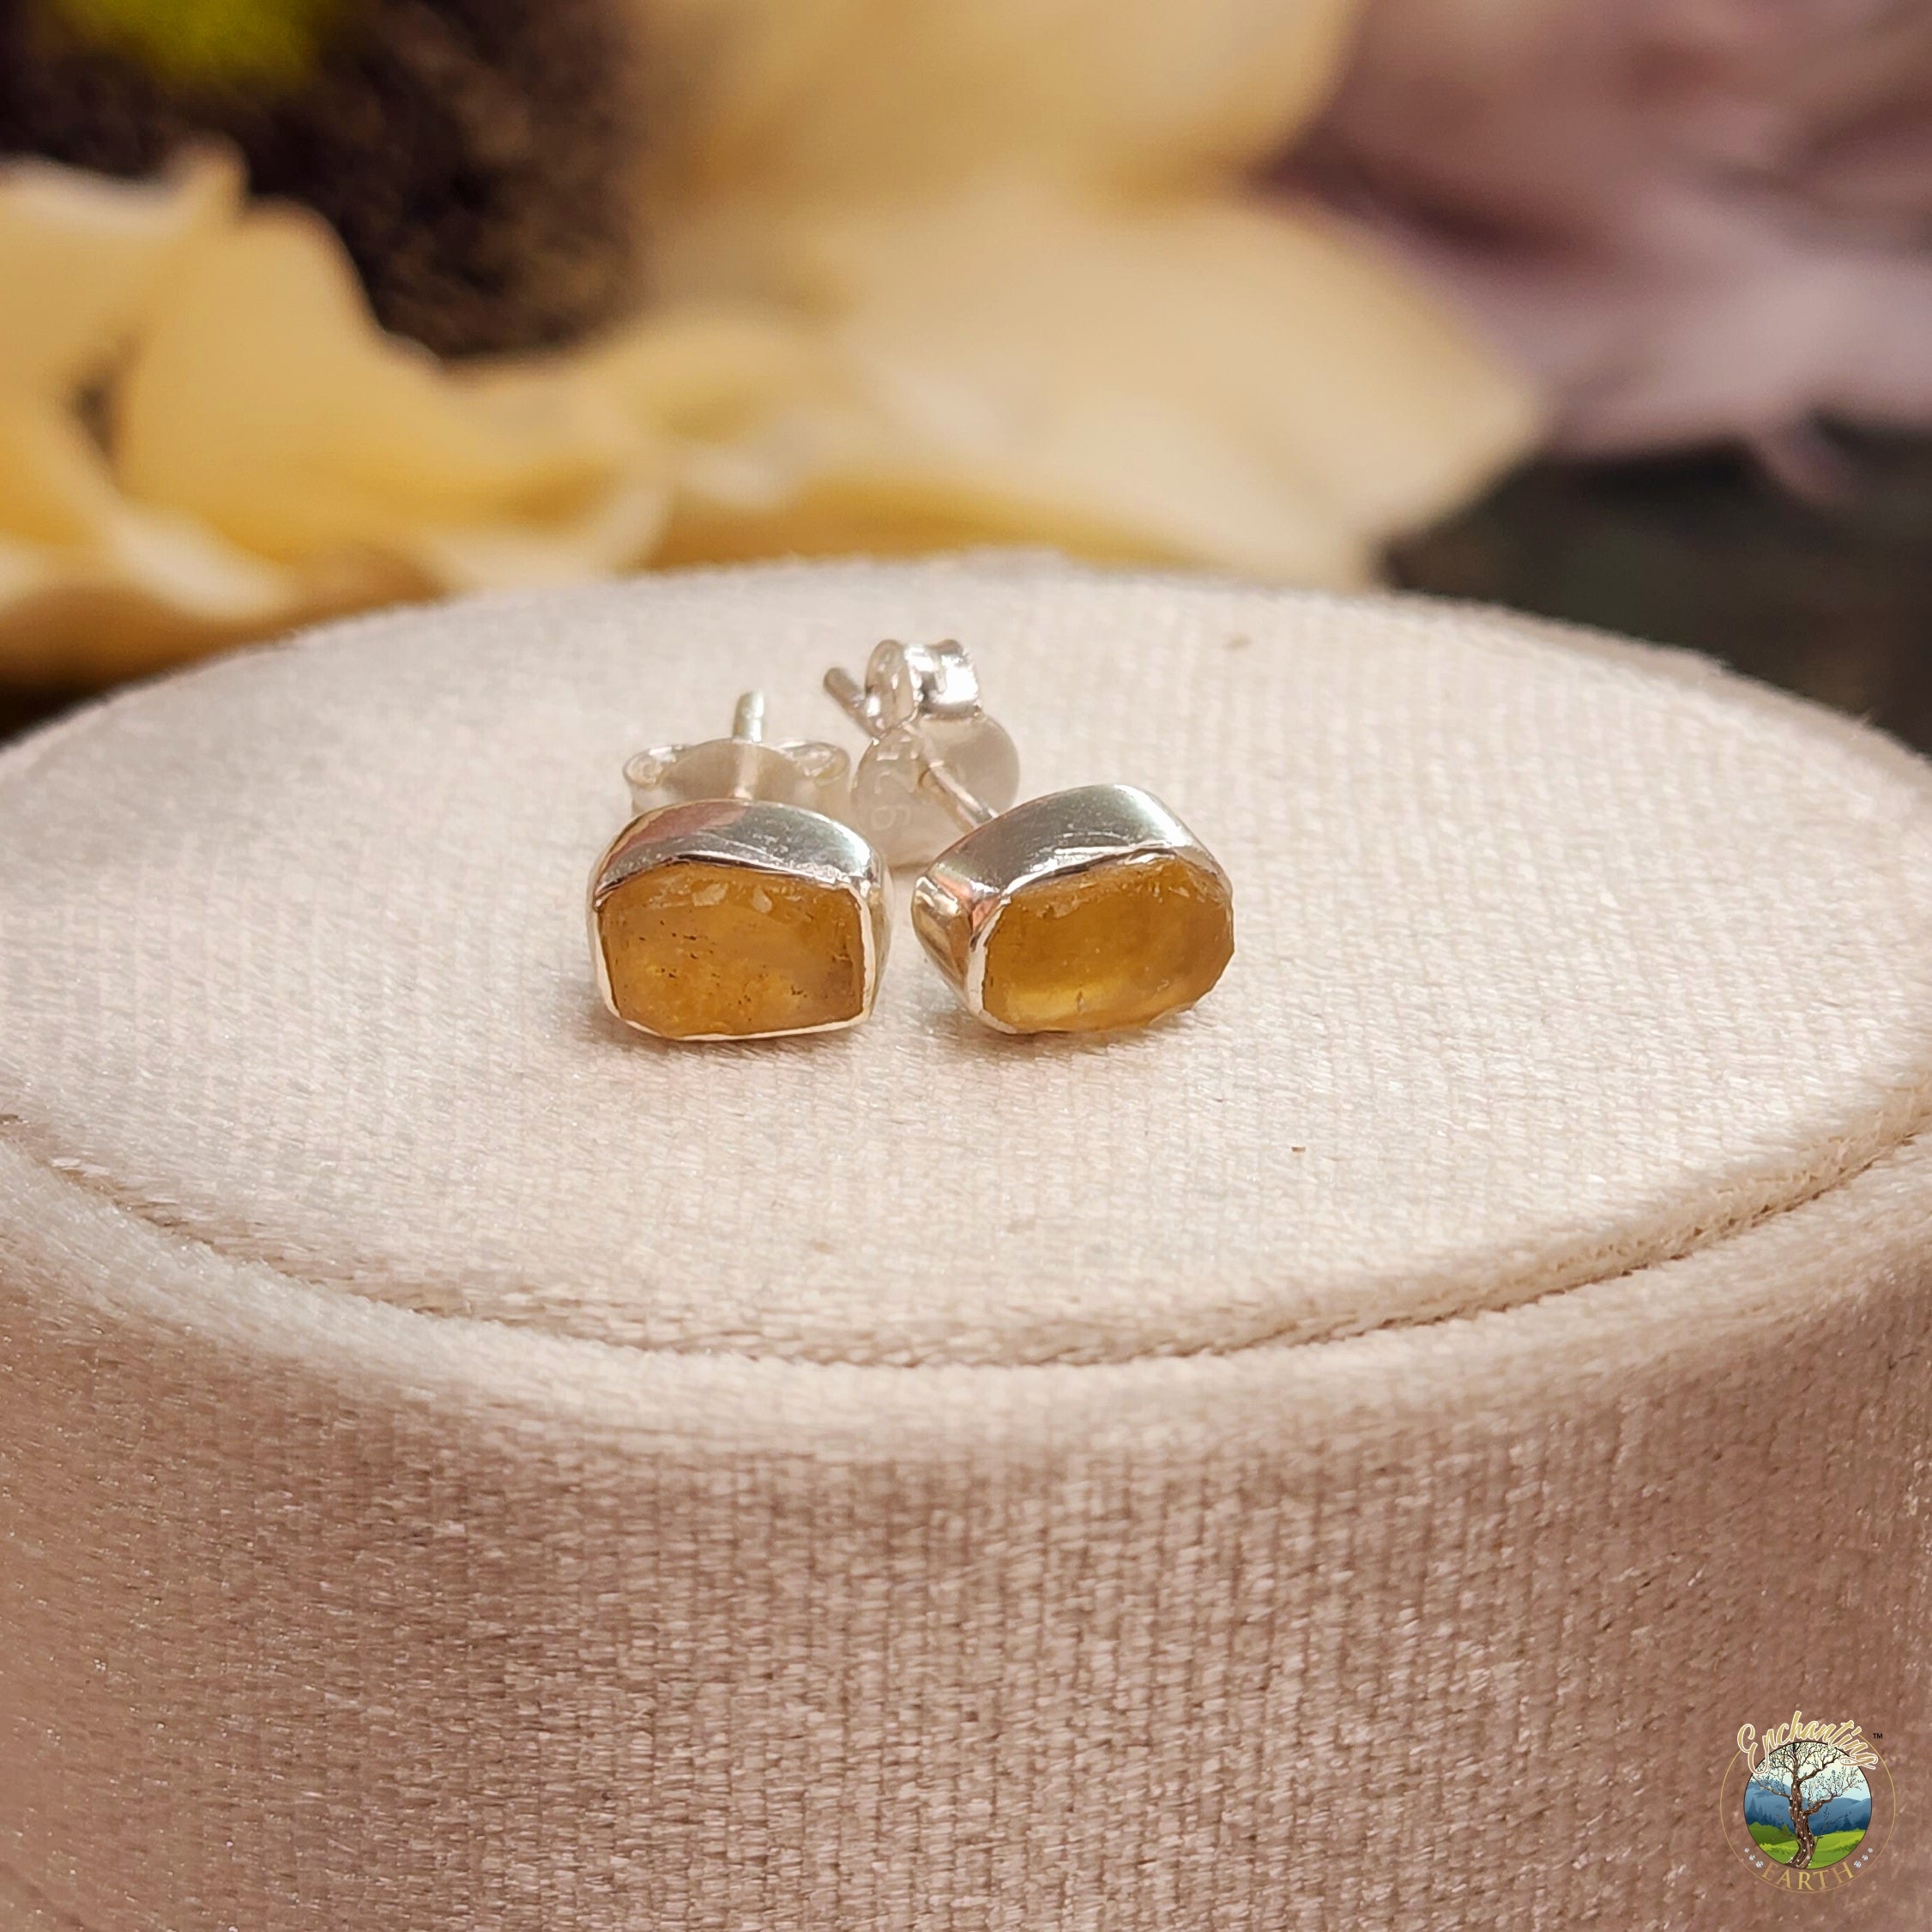 Libyan Desert Glass Raw .925 Silver Stud Earrings for Ascension and Manifesting